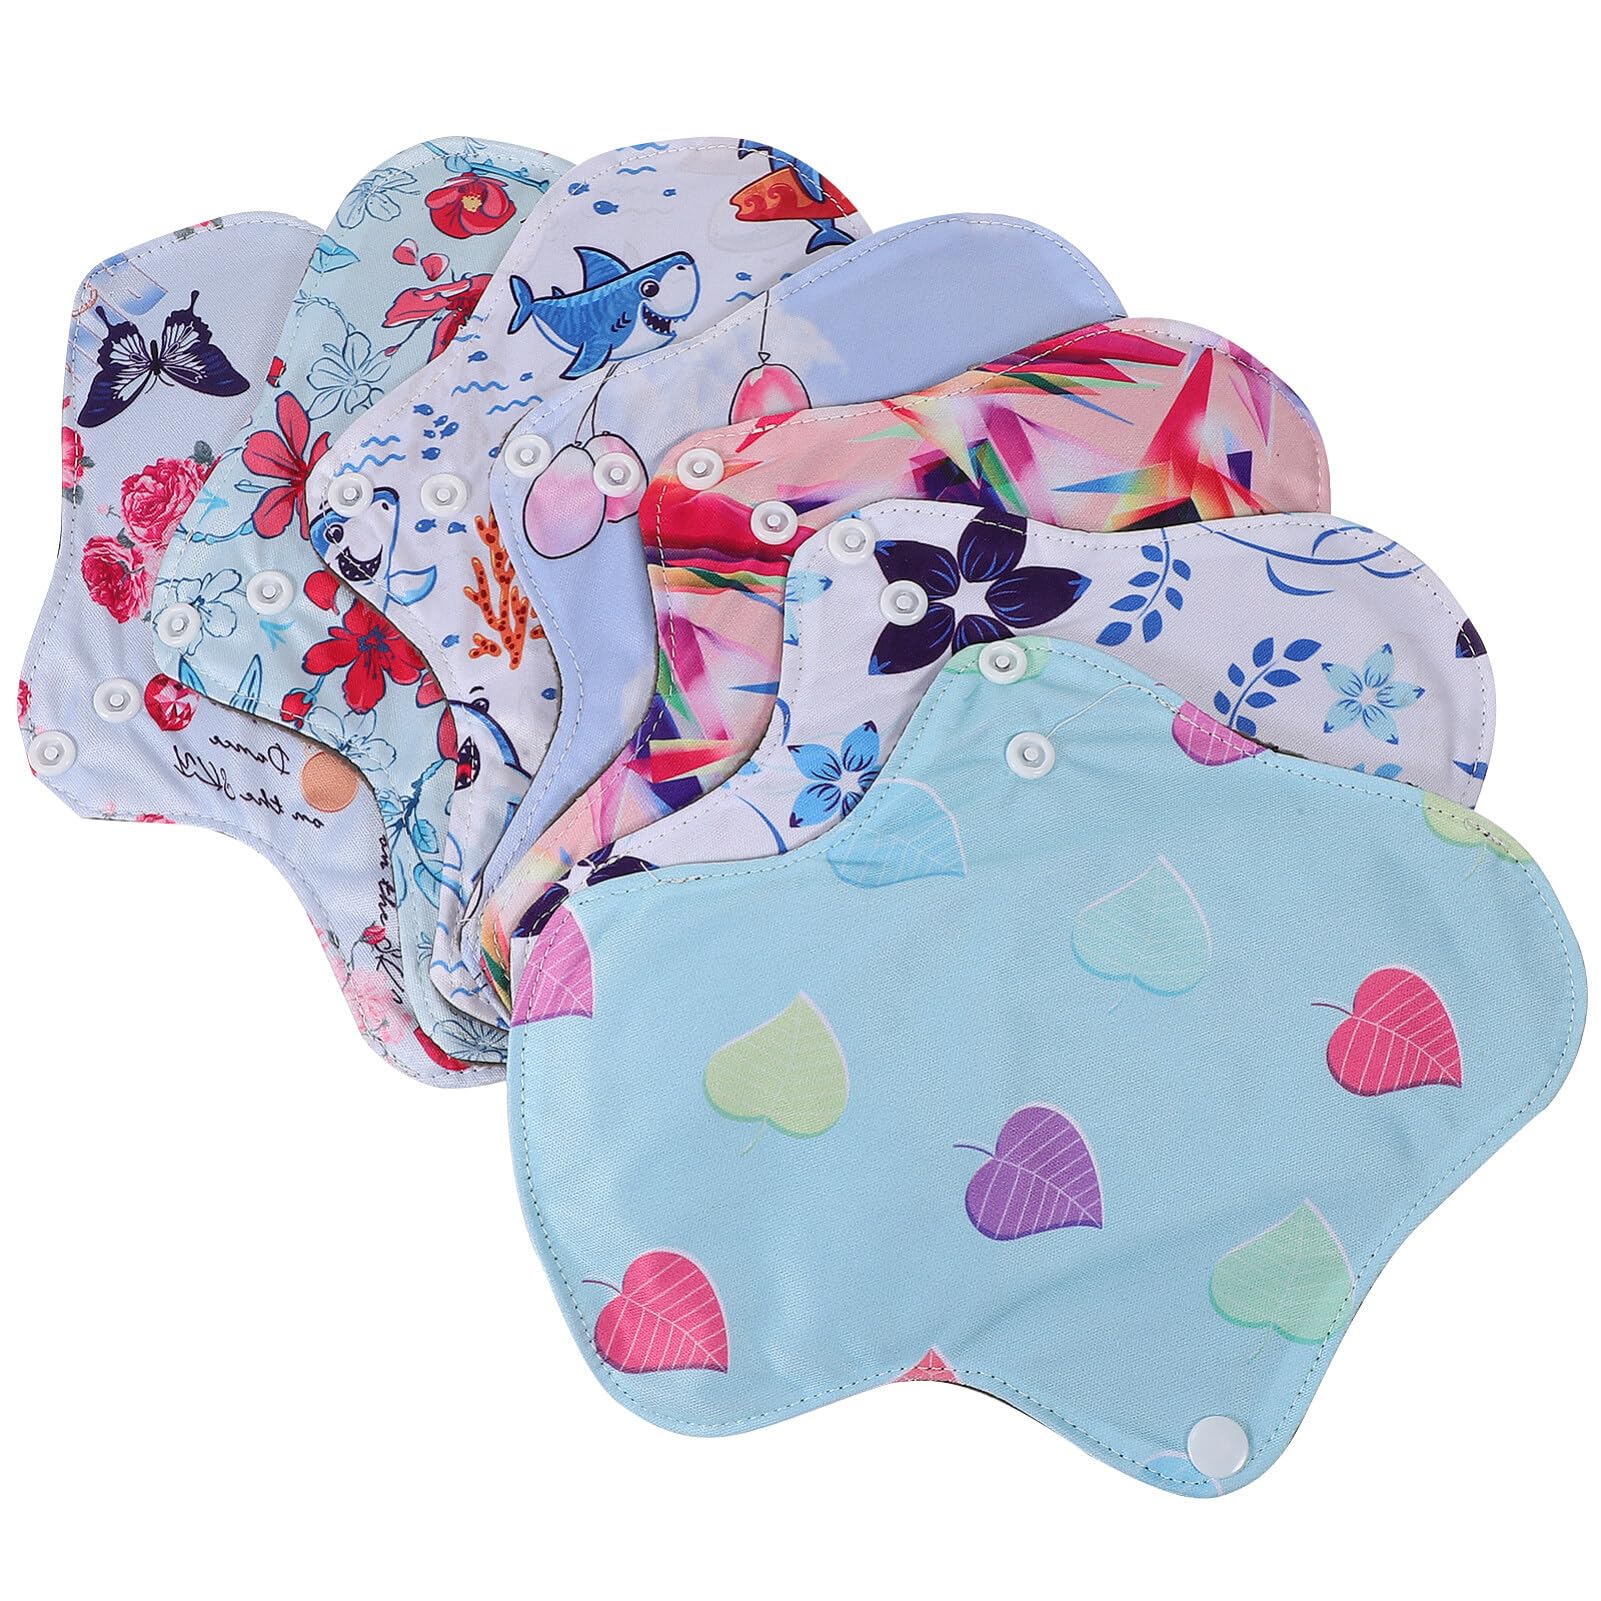 Womens Panties Reusable Menstrual Pads 7pcs Bamboo Charcoal Cloth Washable  Cloth Napkins Panty Liners Incontinence Pads for Teens Women Period Cloth  Pad Women's Panties